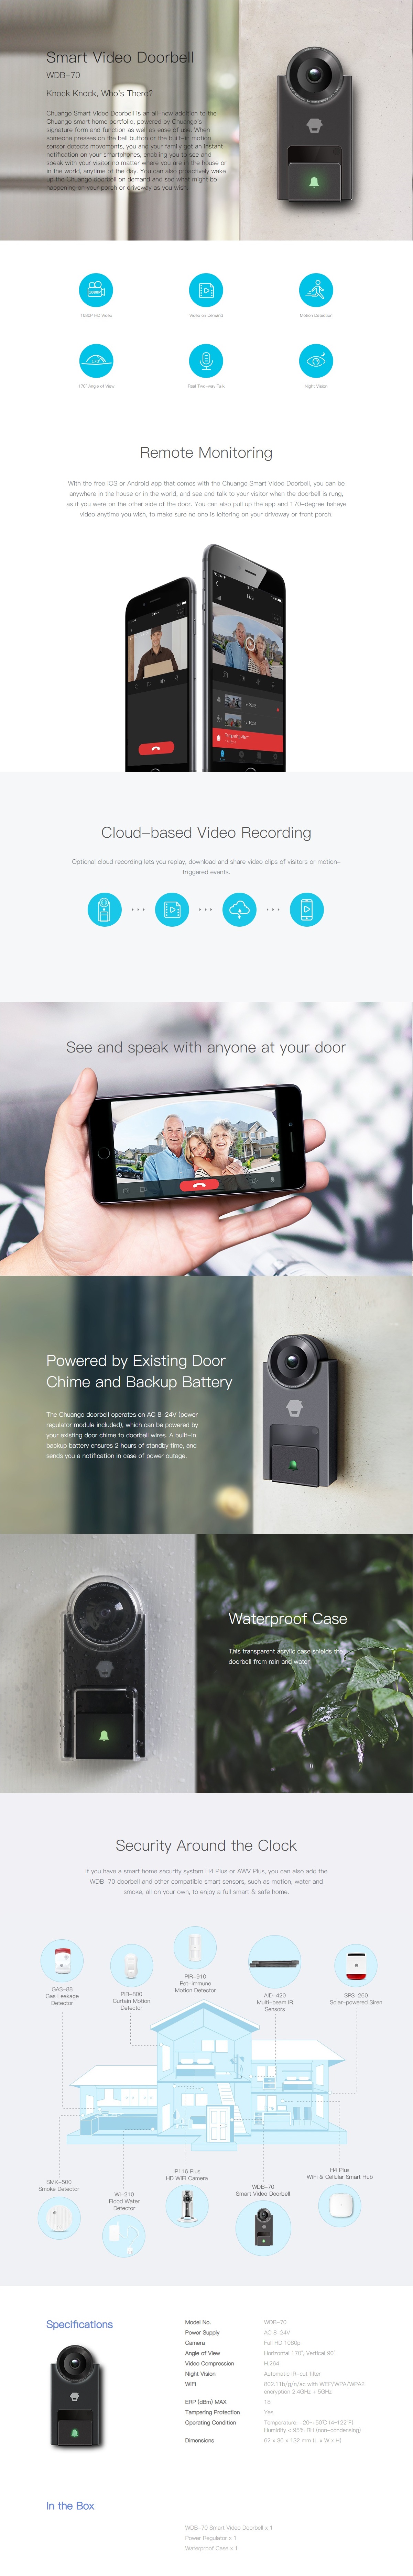 A large marketing image providing additional information about the product Chuango WDB-70 Smart Video Doorbell - Additional alt info not provided